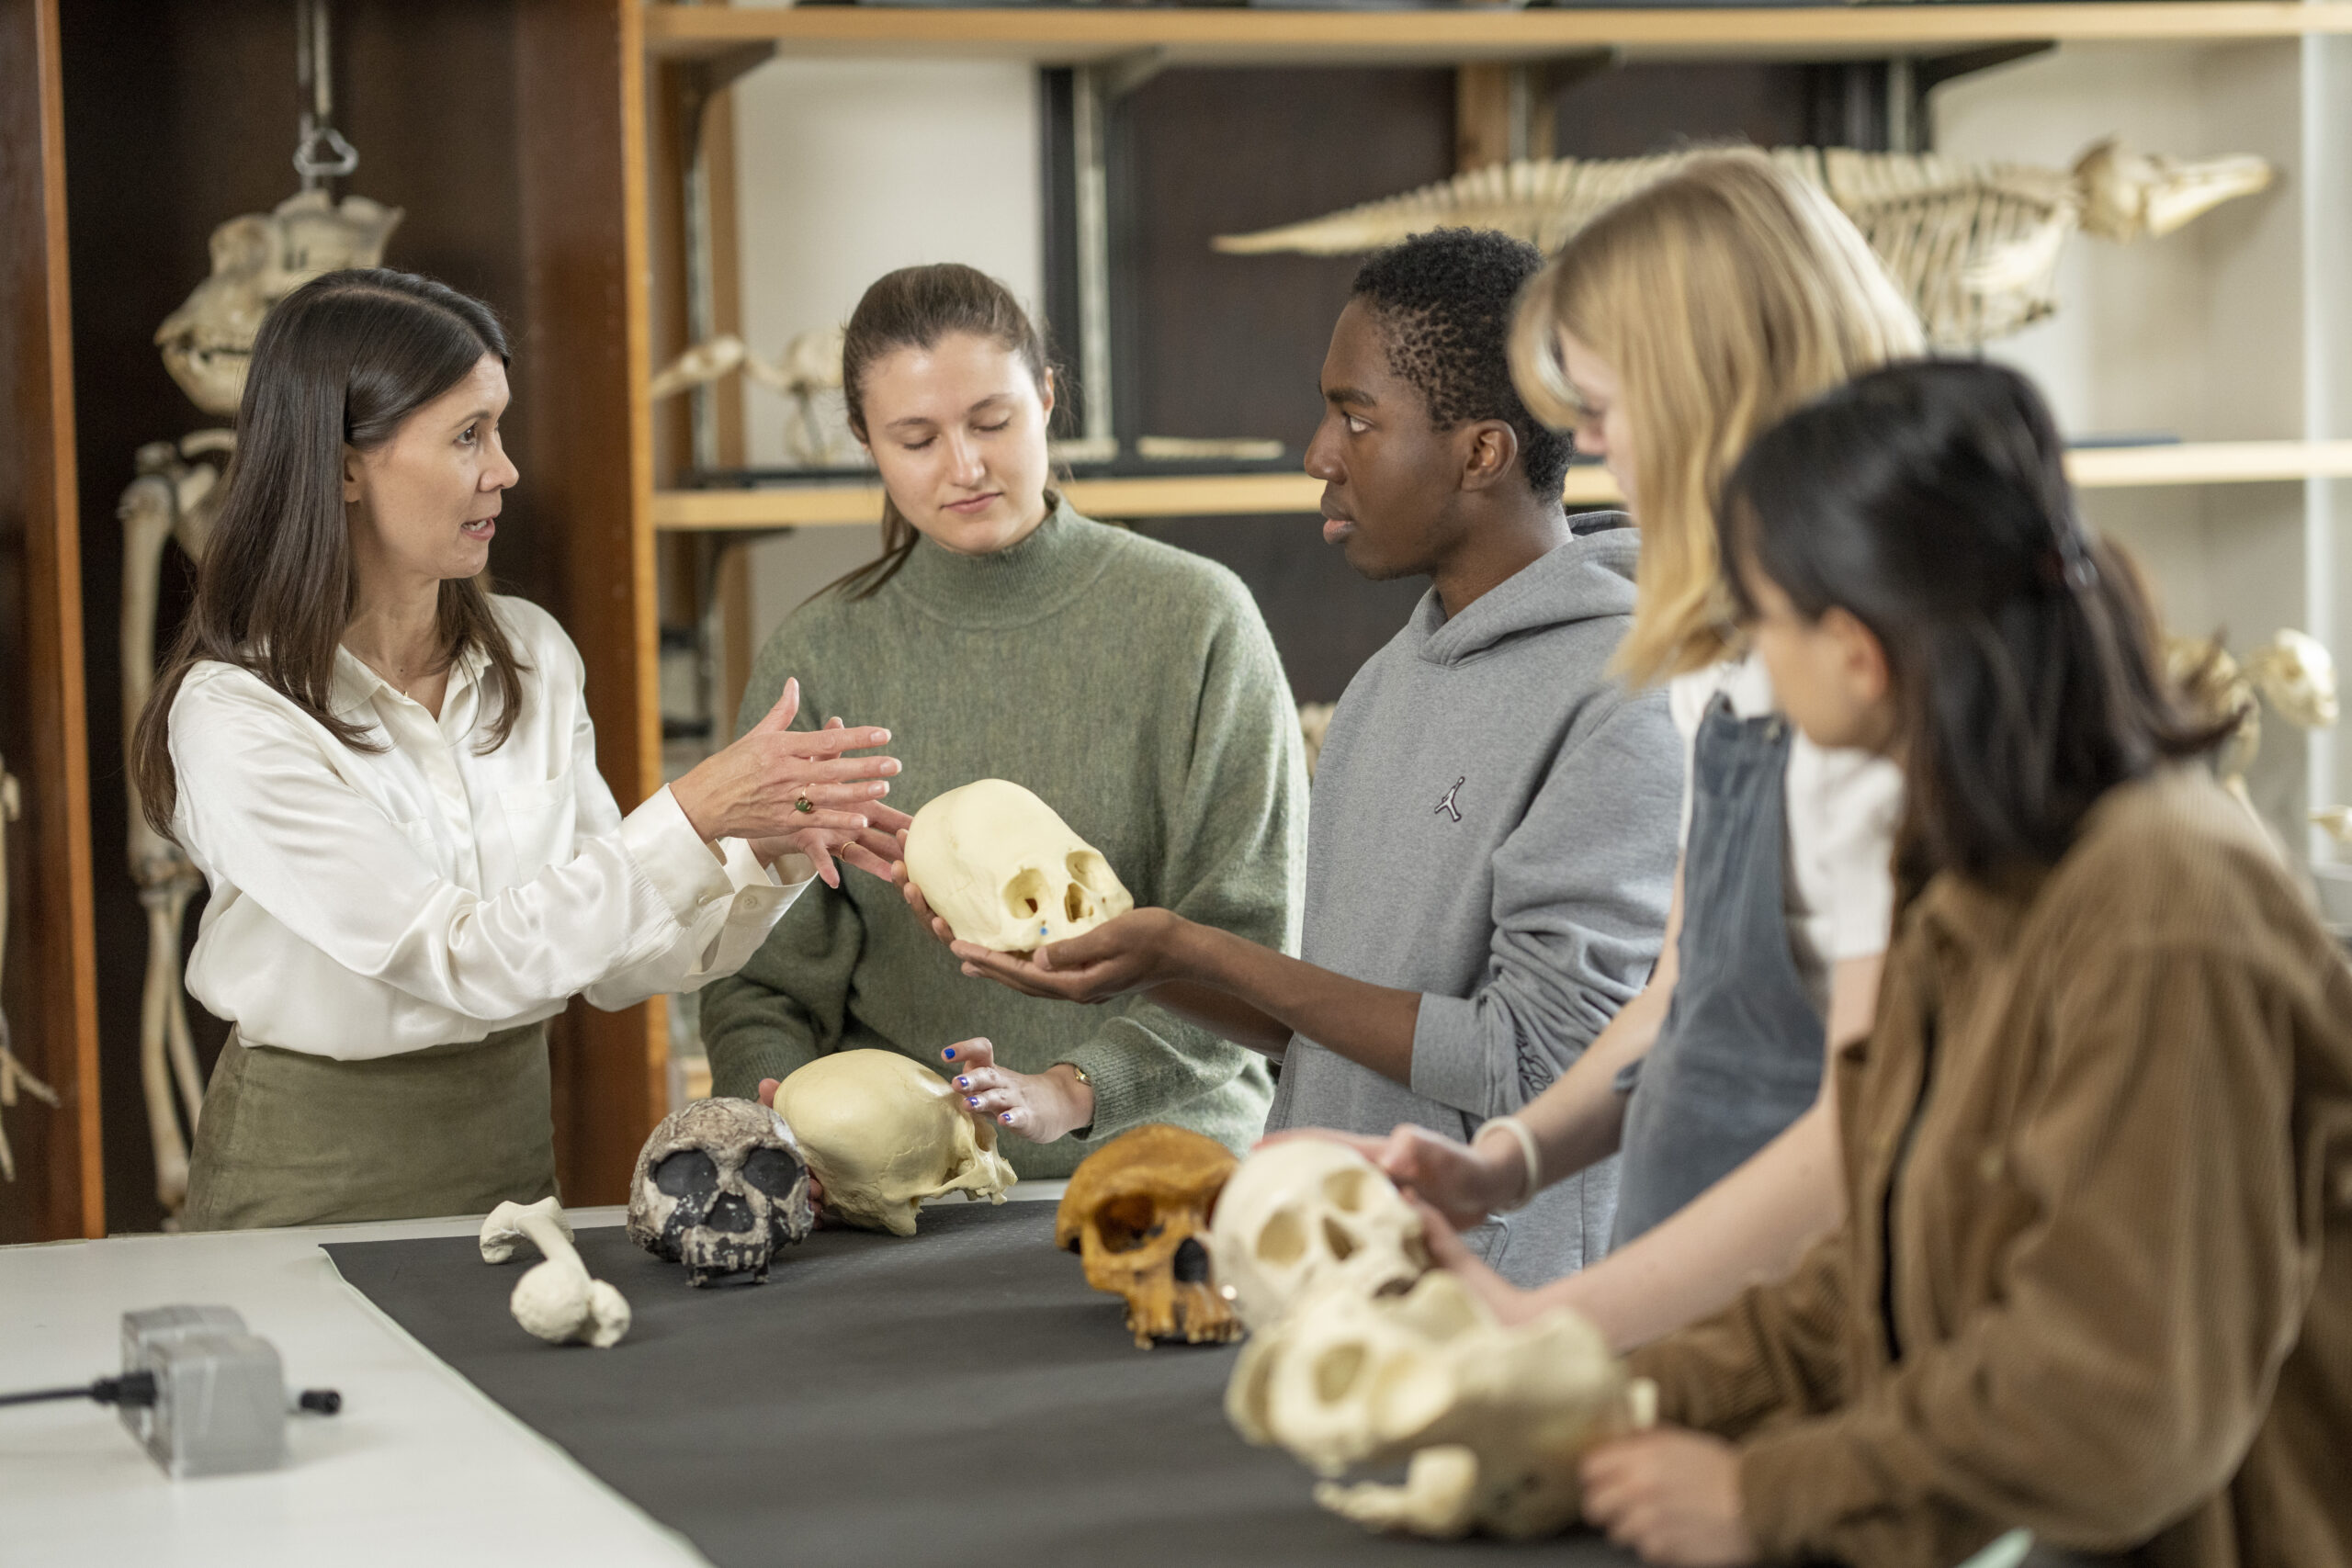 Dr. Tiffiny Tung discusses forensic analysis of skeletons in genocide cases with her Immersion class (Forensics, Genocide, and Human Rights) in the Osteology Lab.